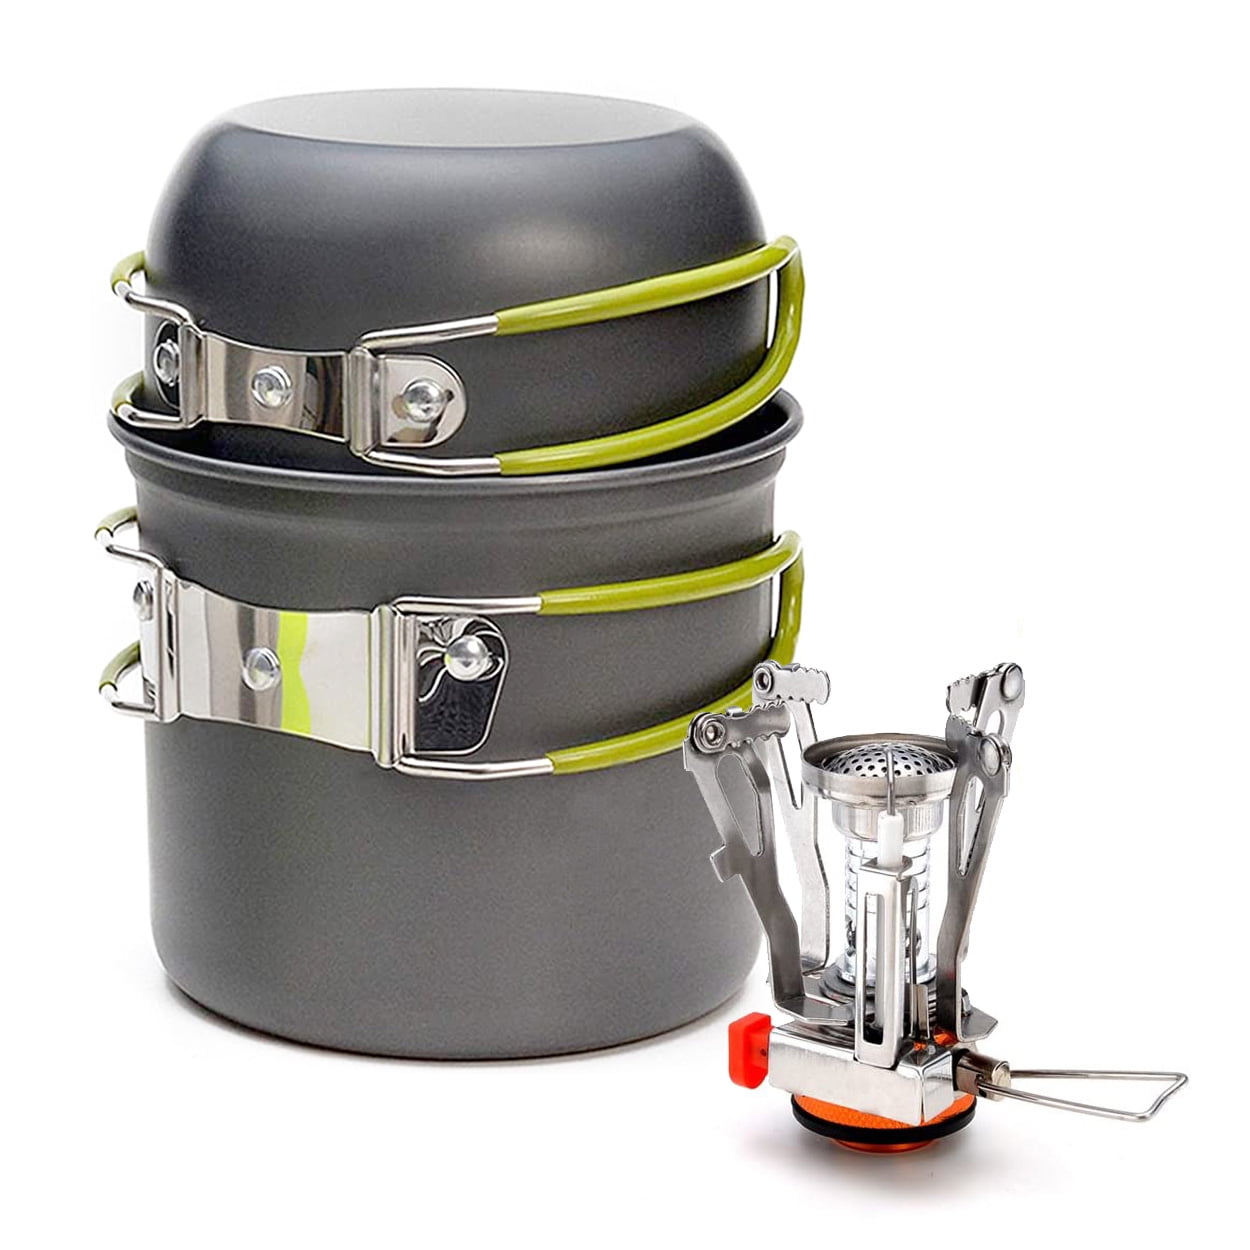 Lightweight Non-stick Camping Cookware Pot Set with Camping Stove for